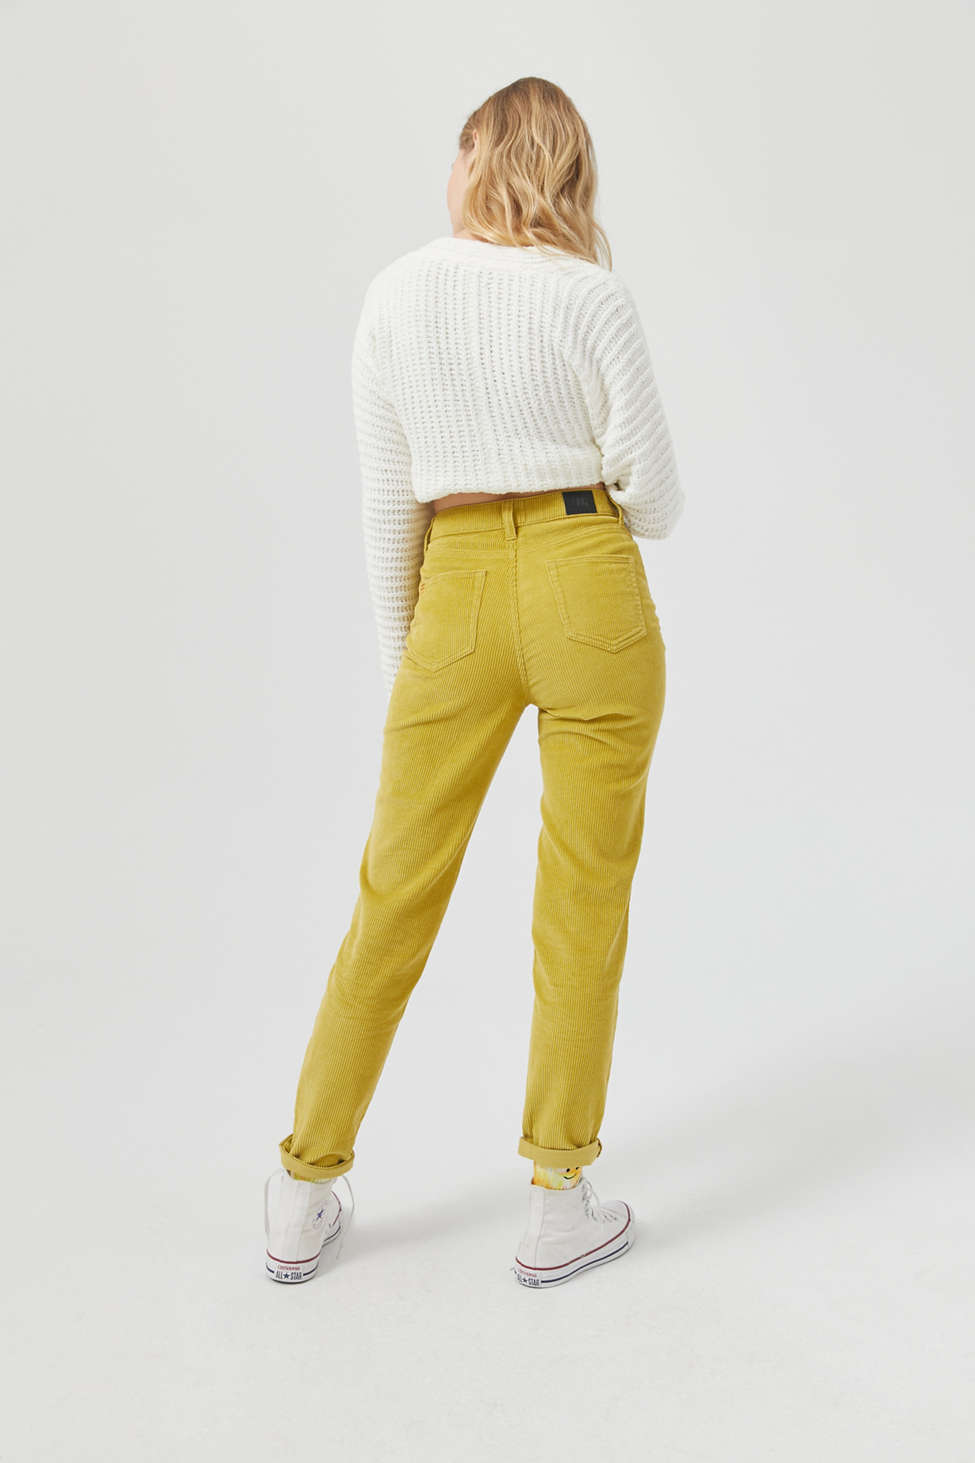 BDG Color Corduroy High-Waisted Mom Pant | Urban Outfitters